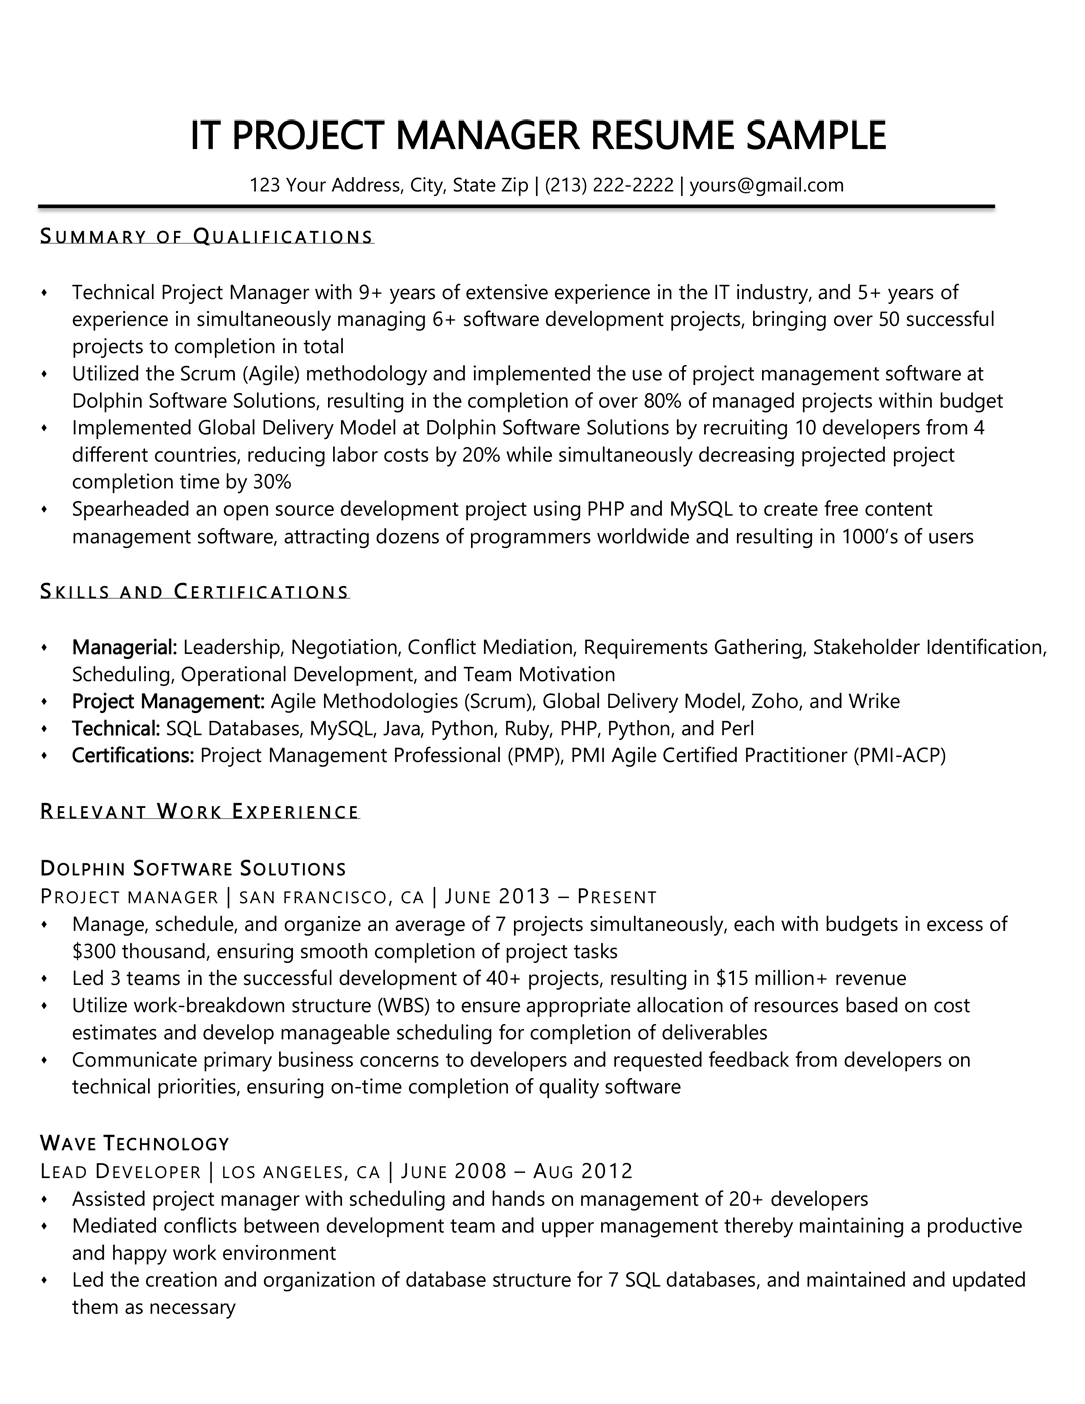 Project Manager Resume Sample & Writing Tips  Resume Companion